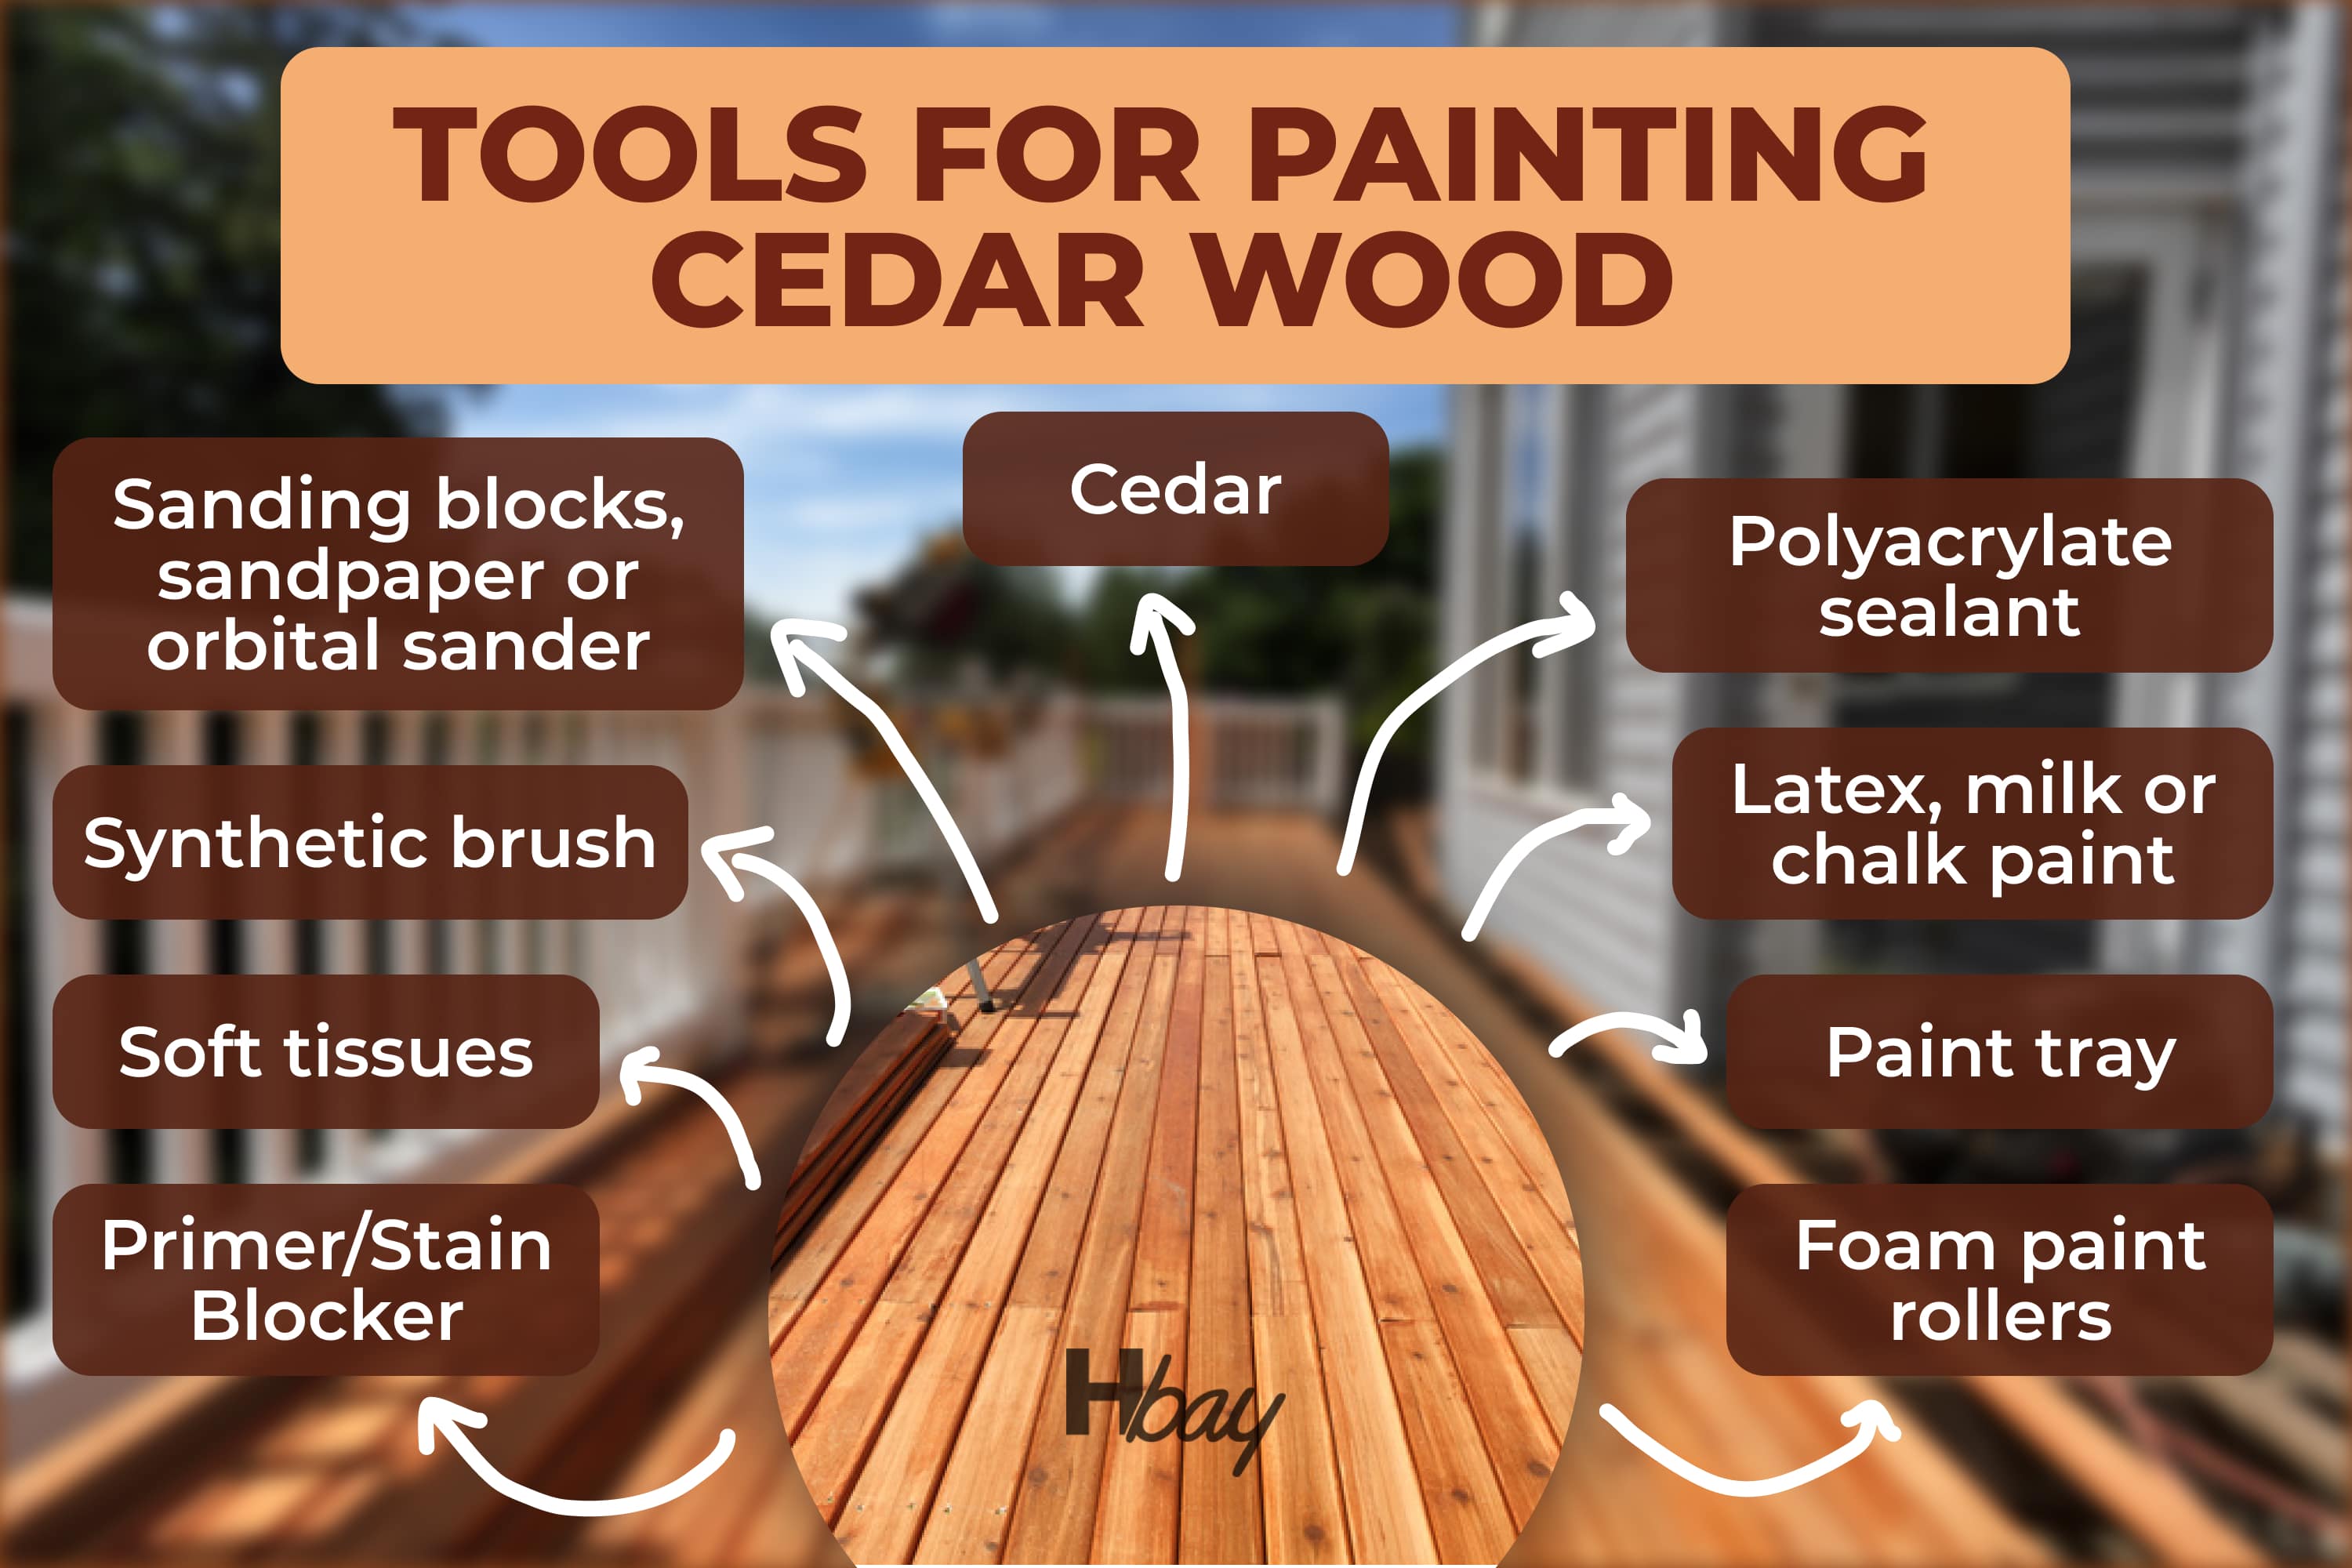 Tools for painting cedar wood